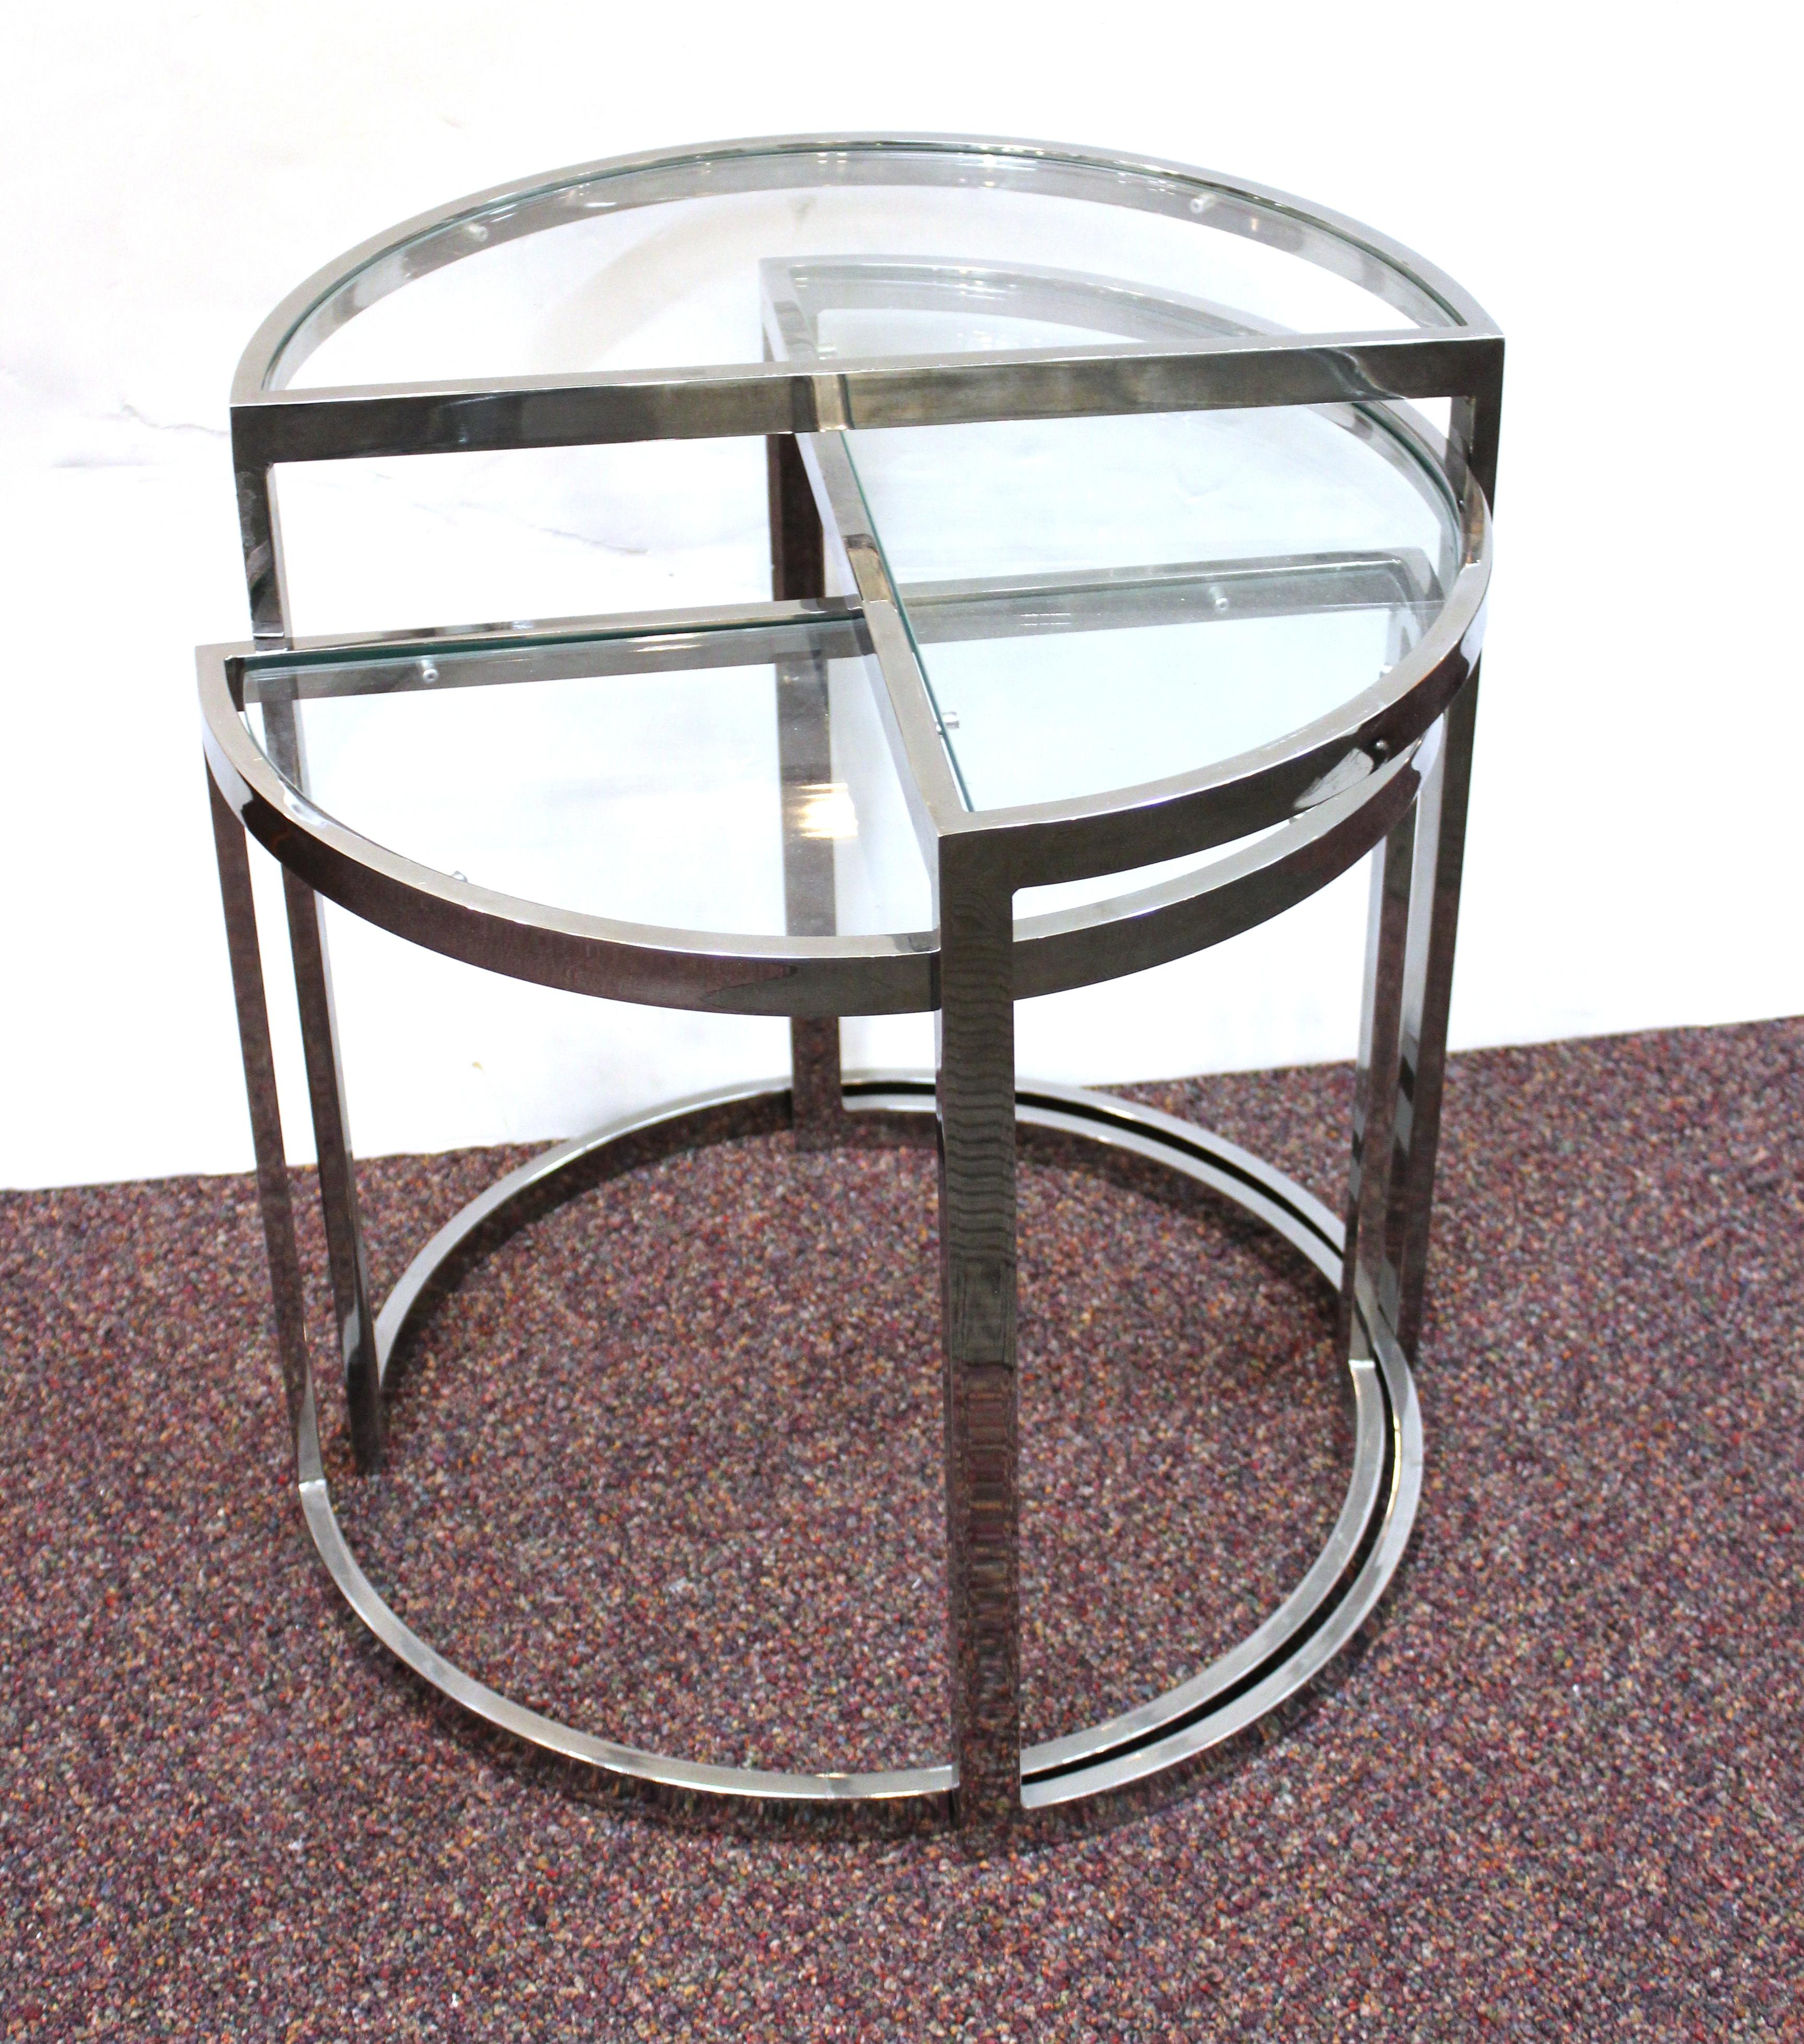 American Mid-Century Modern Chrome Nesting Tables in Half-Moon Shapes